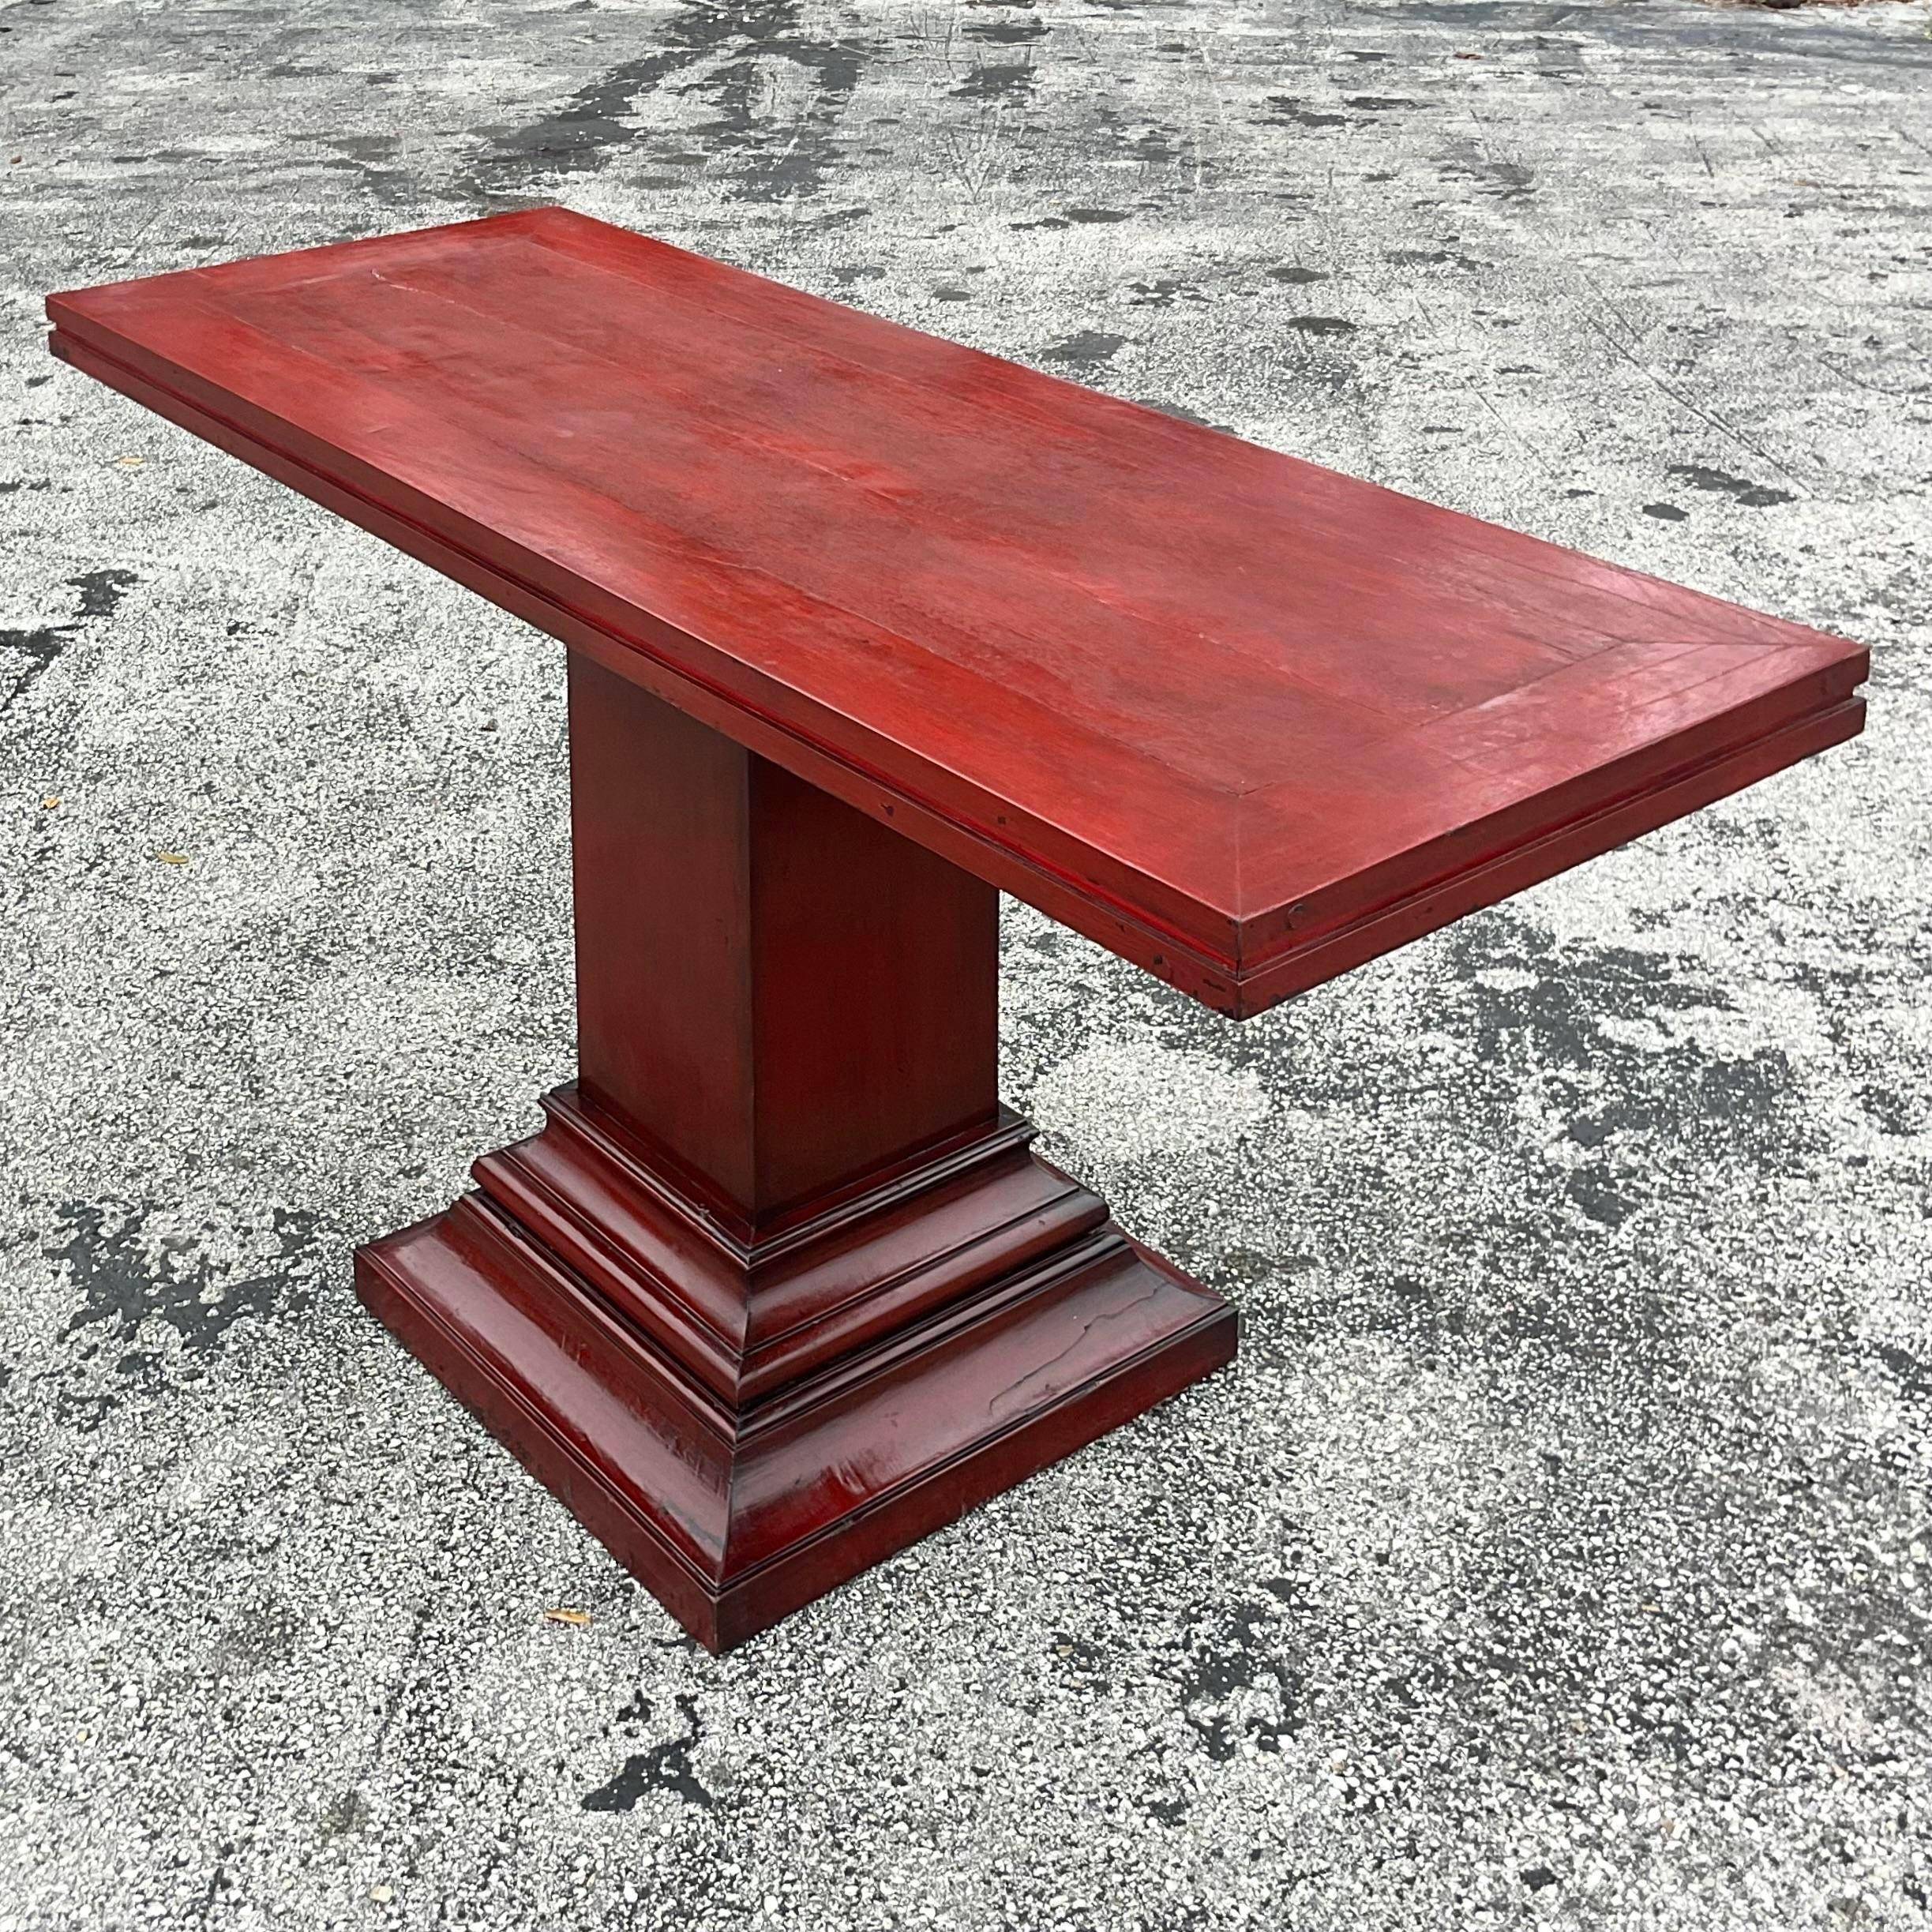 A fantastic vintage Boho console table. A deep red lacquered finish with beautiful stacked Millwork design. Acquired from a Palm Beach estate.